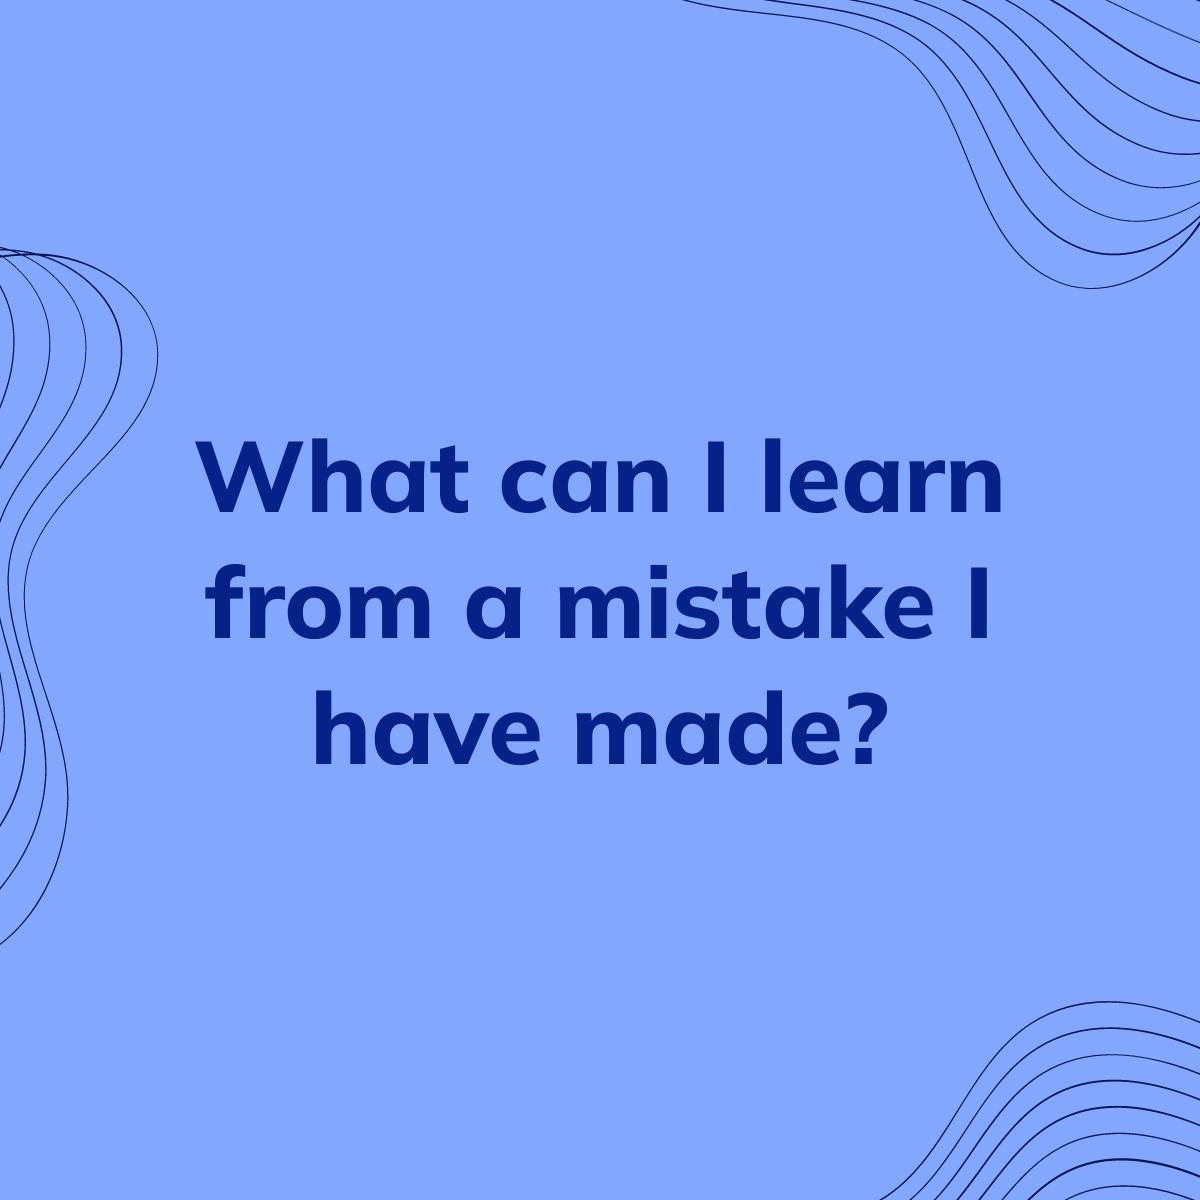 Journal Prompt: What can I learn from a mistake I have made?